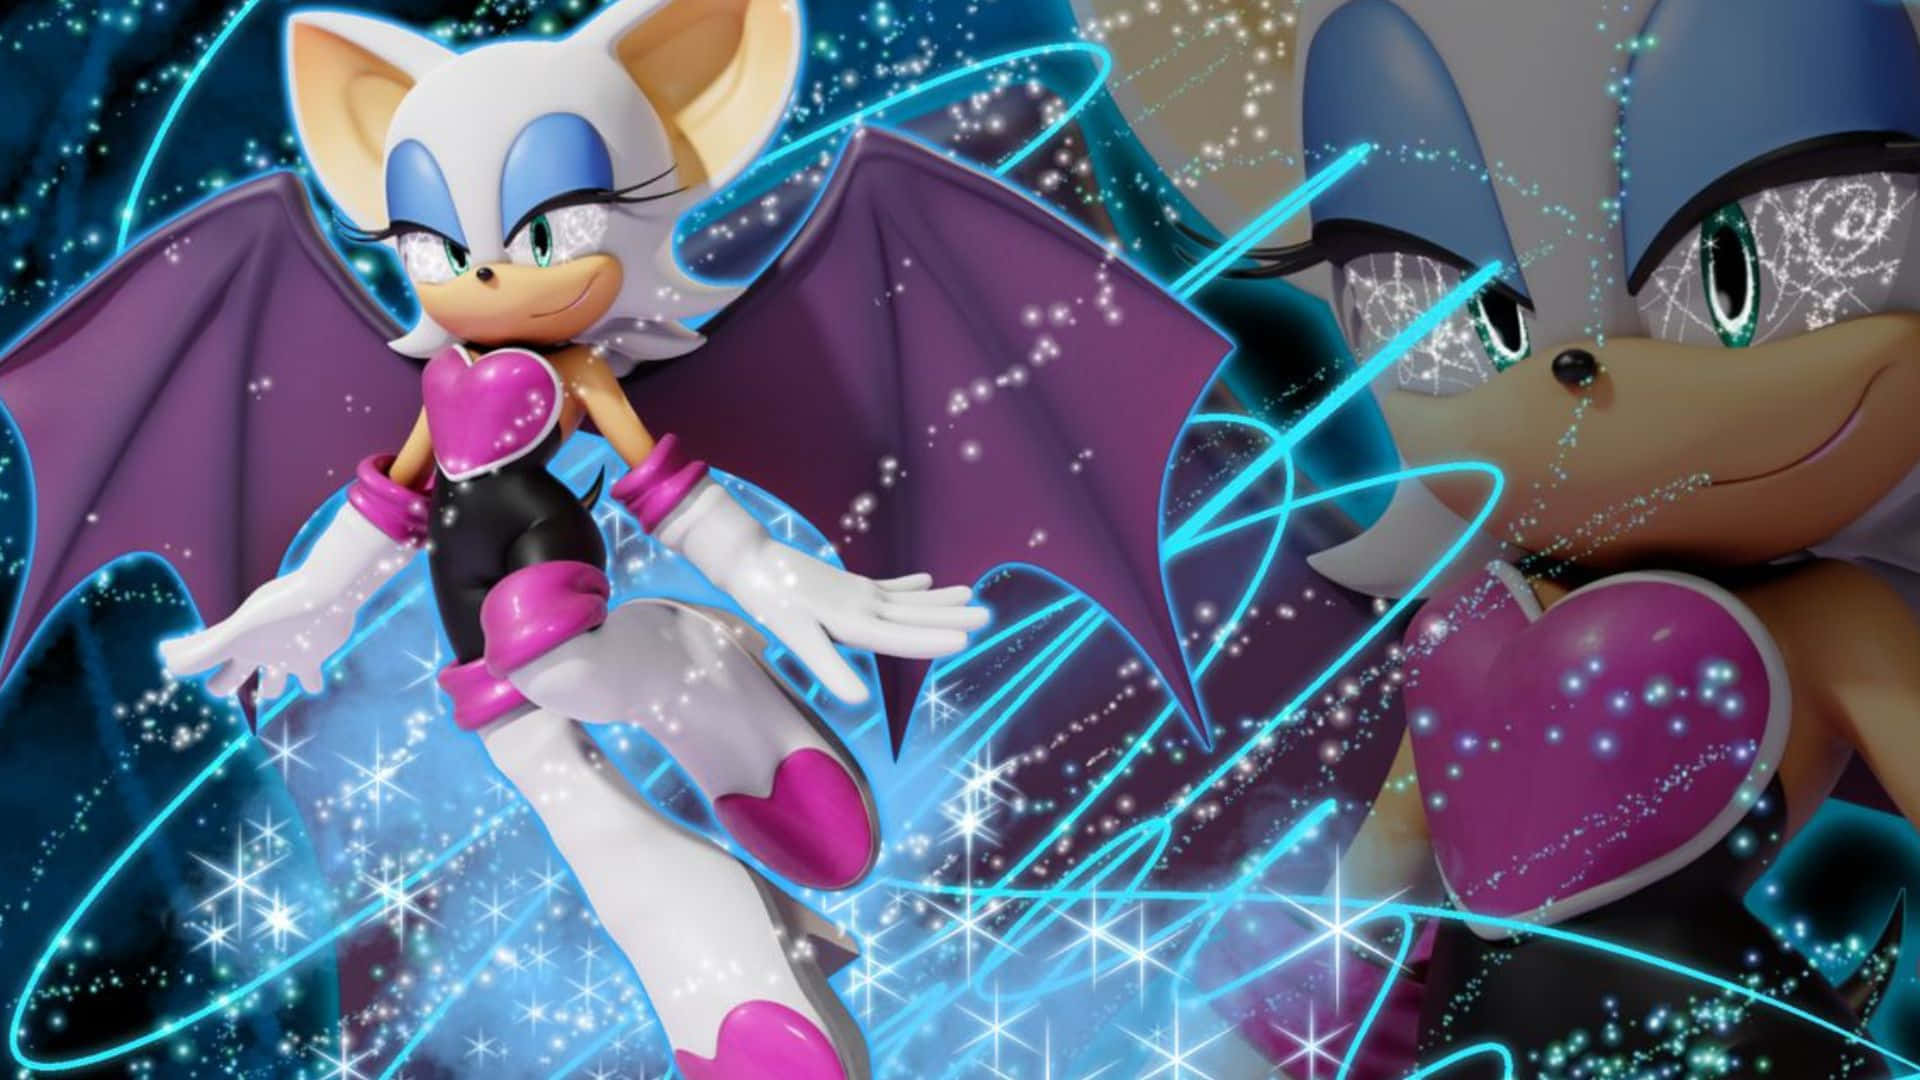 Rouge the Bat striking a pose in an action-packed scene. Wallpaper